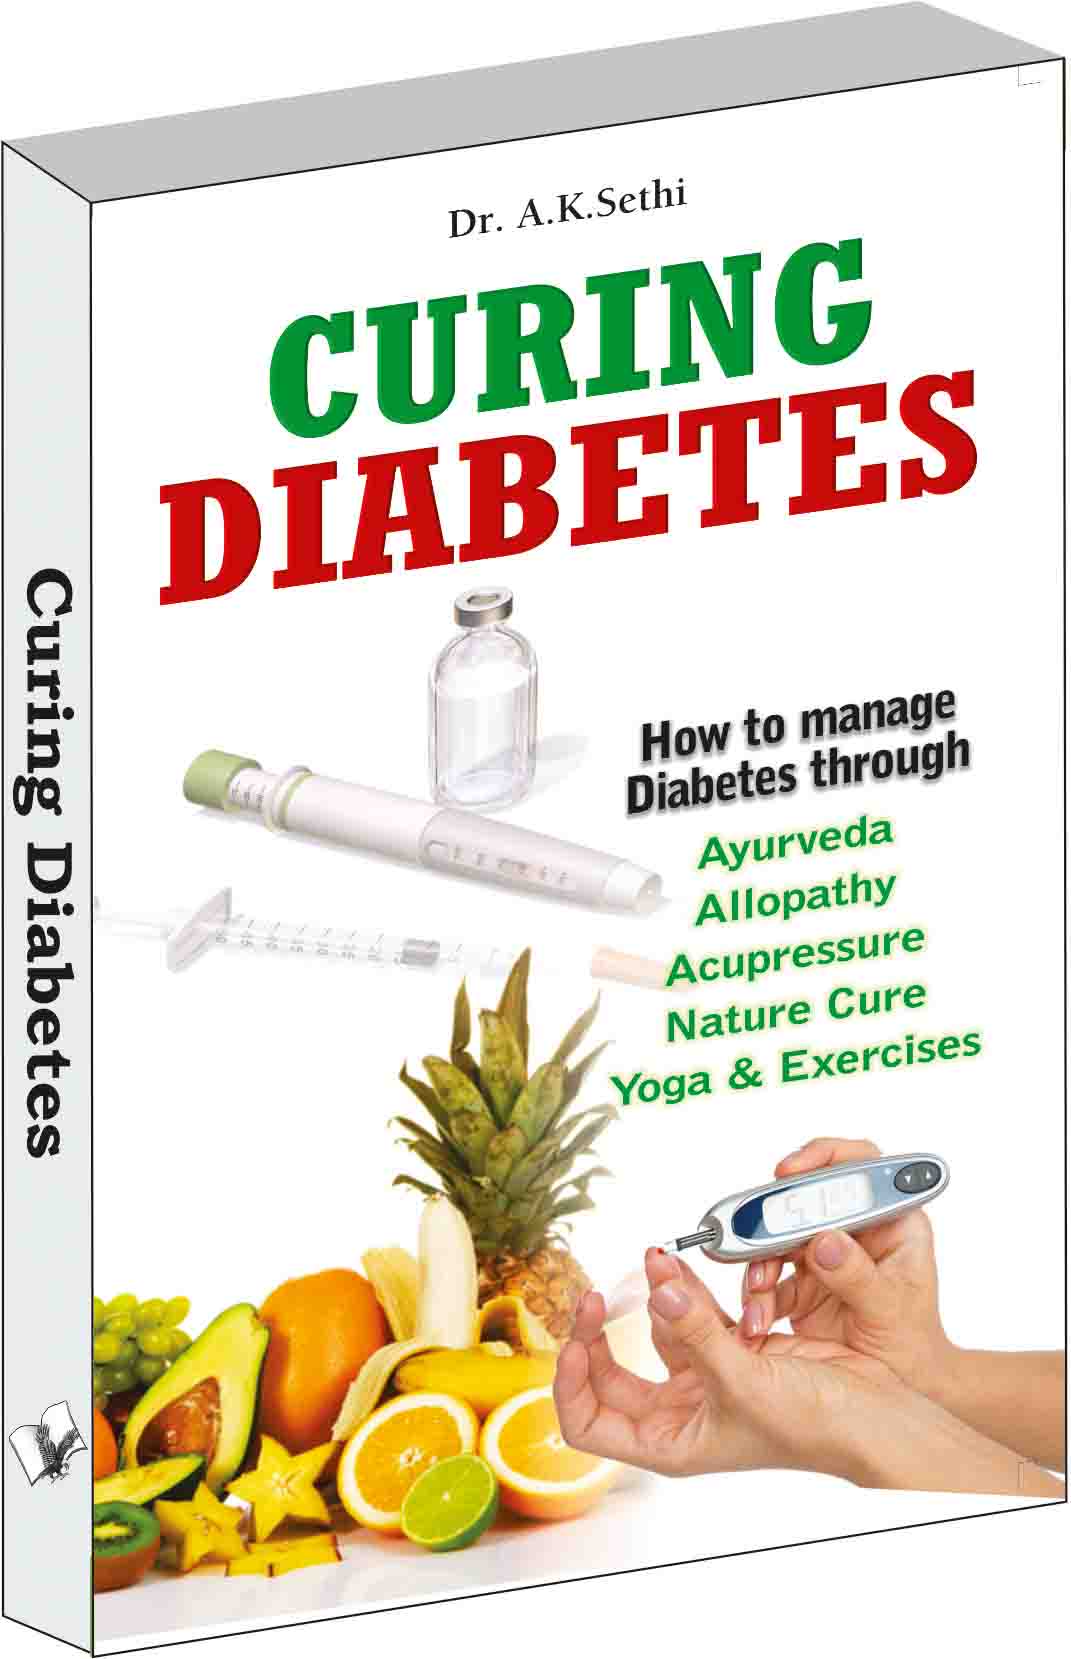 Curing Diabetes -Managing Diabetes through care & attention